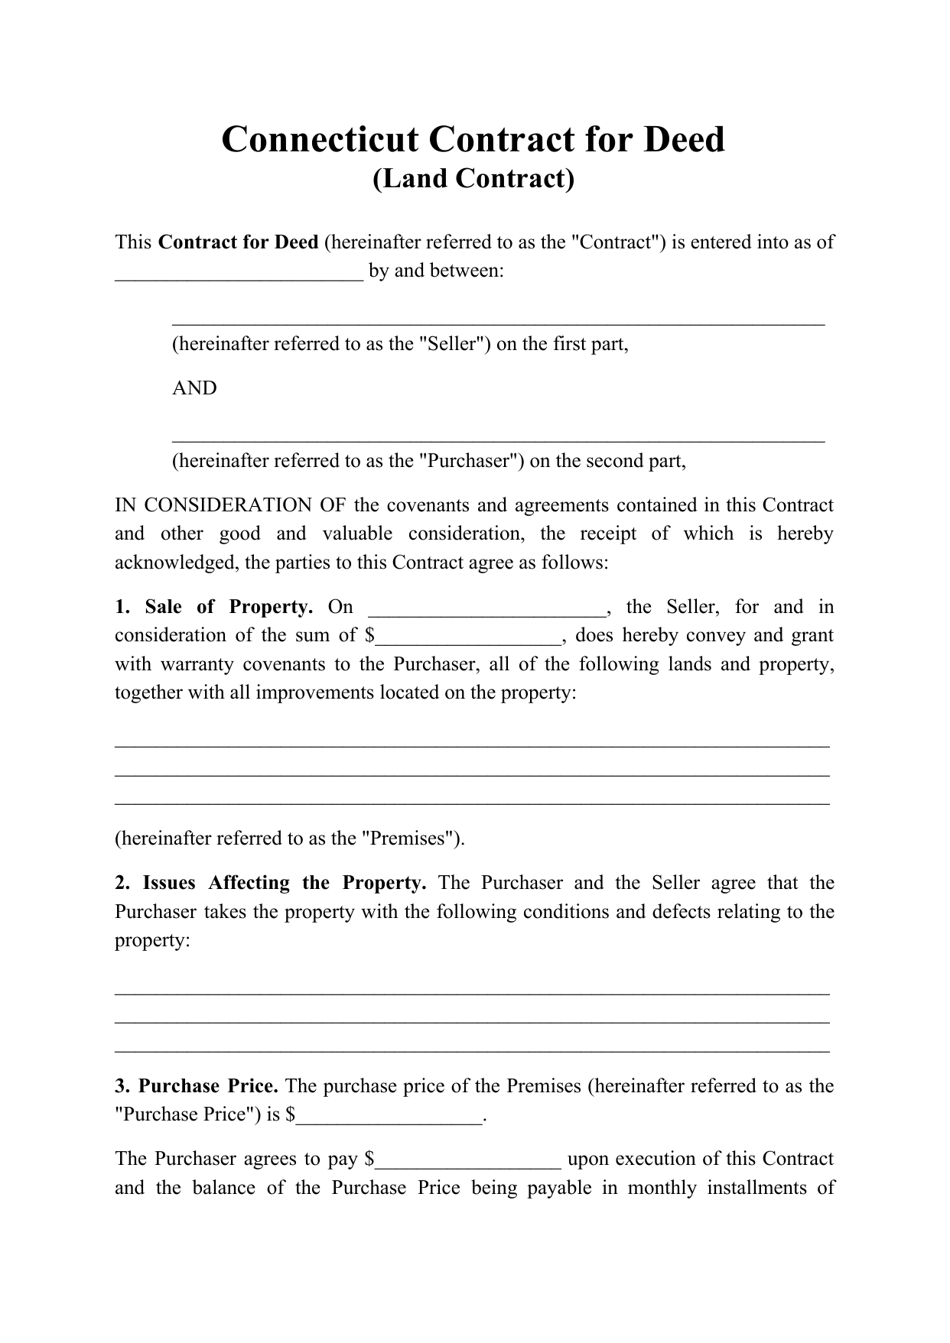 Contract for Deed (Land Contract) - Connecticut, Page 1